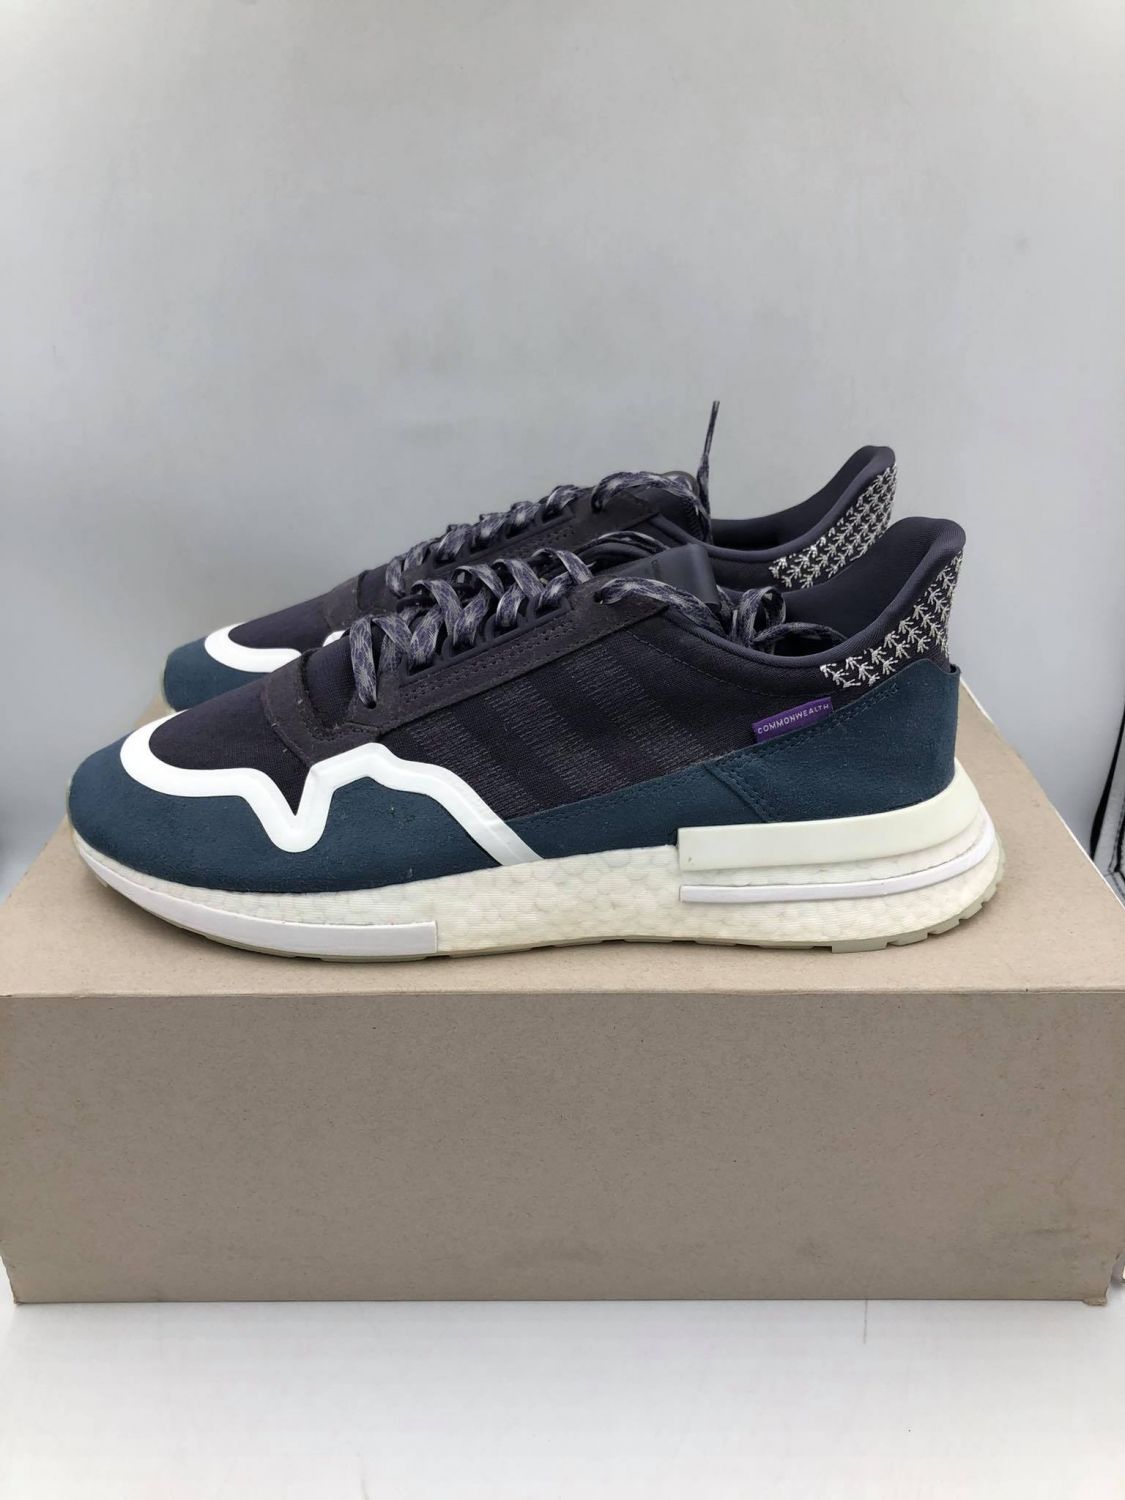 Adidas ZX 500 RM Commonwealth FNF | AfterMarket